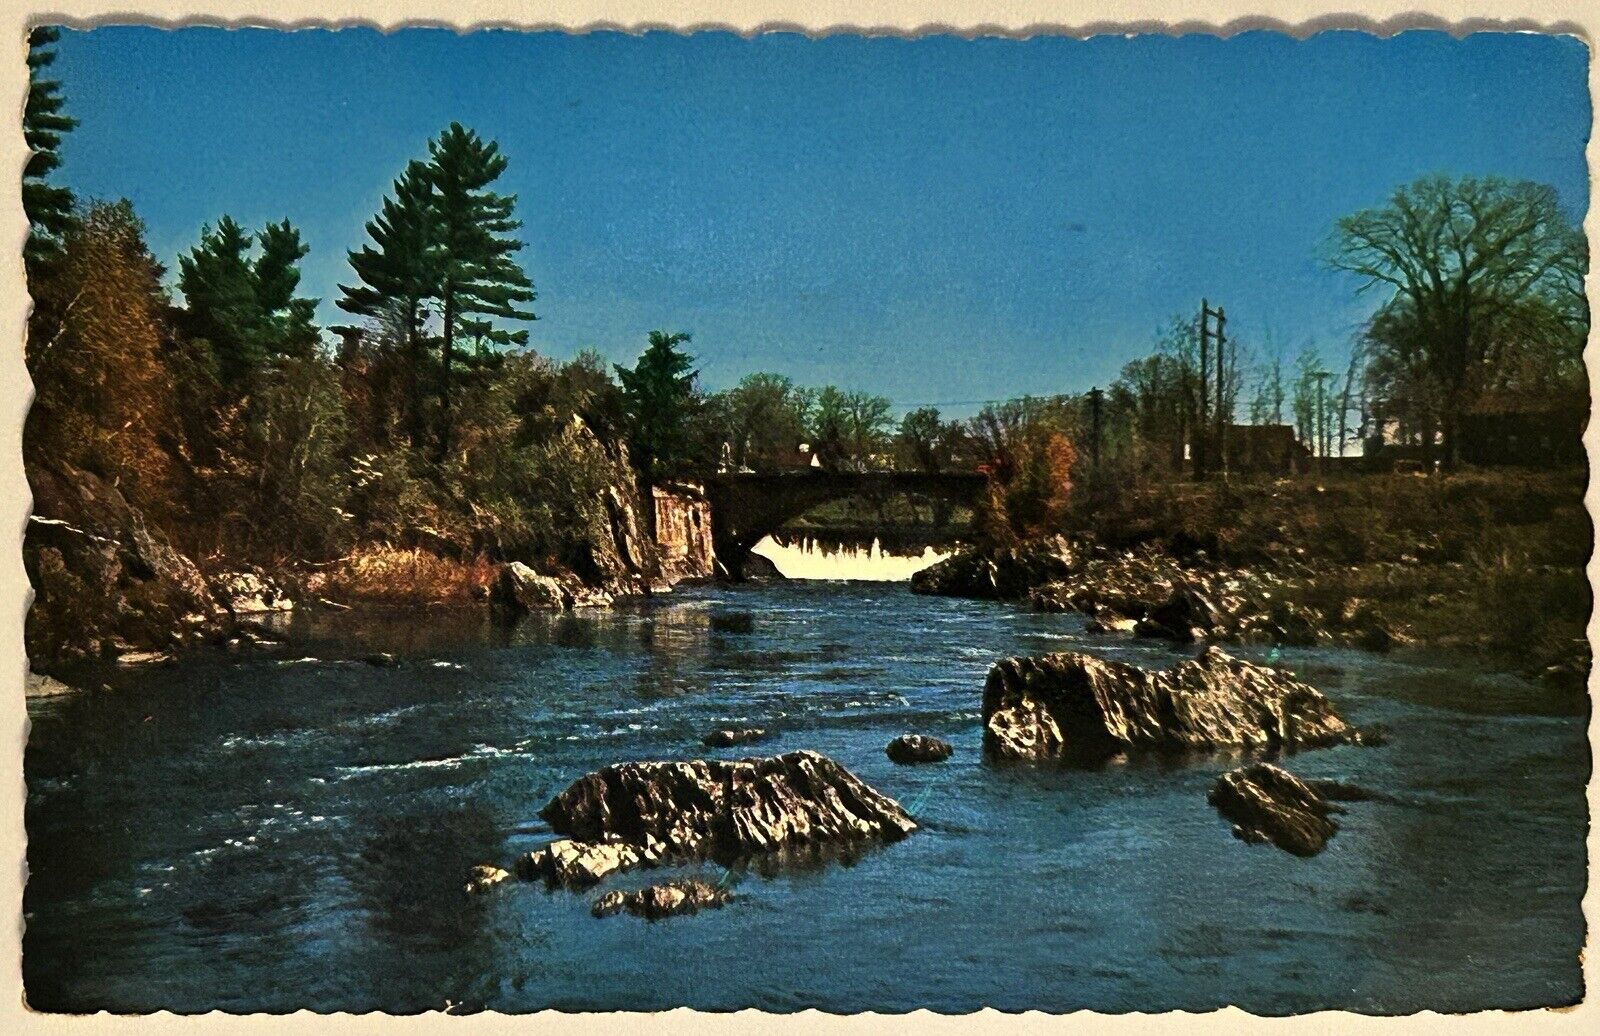 The Falls in Enosburg Vermont Missisquoi River vintage postcard posted